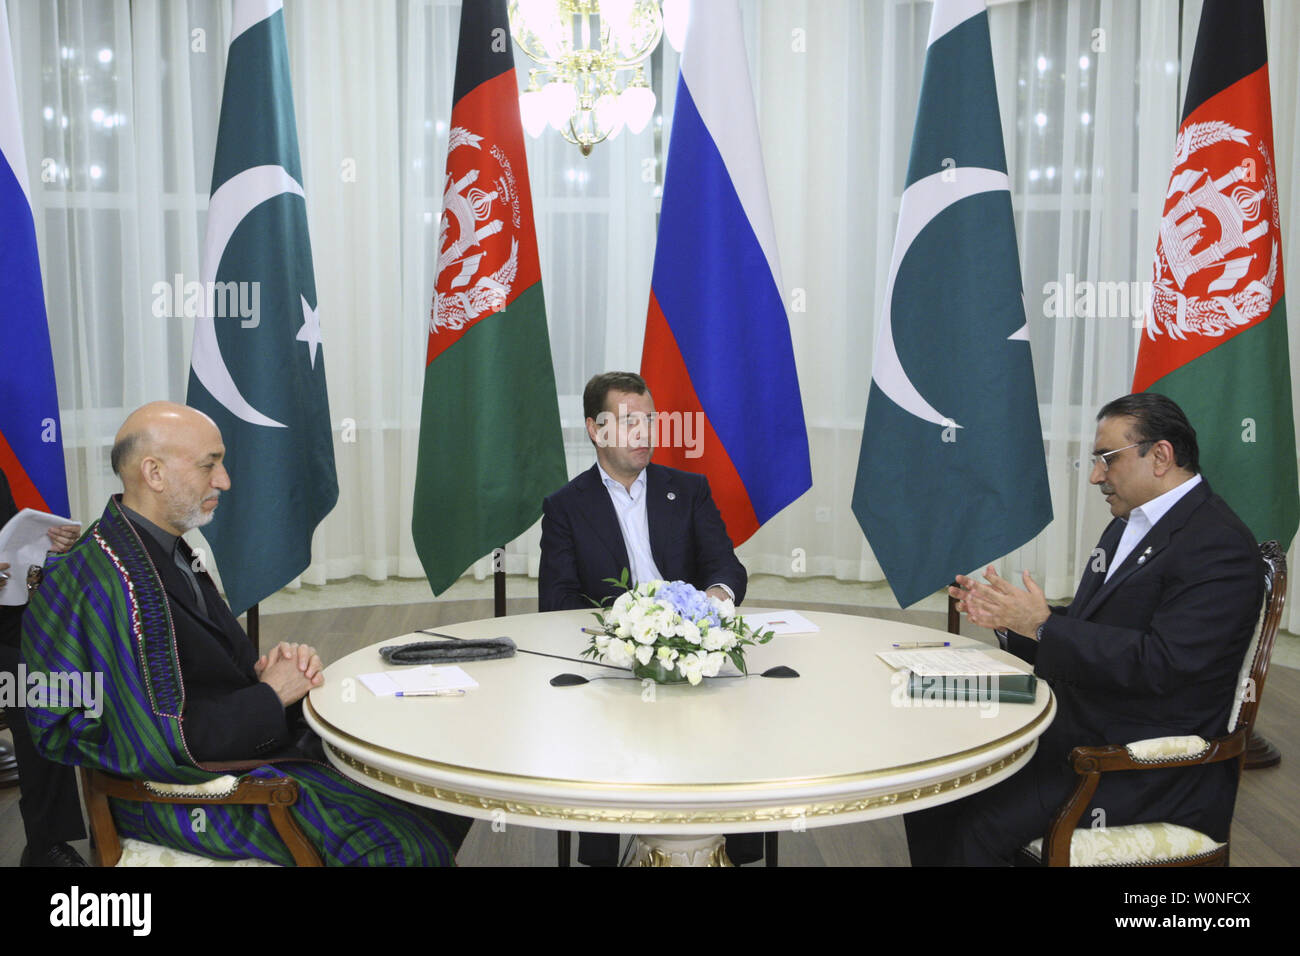 Russian President Dmitry Medvedev (C), Afghan President Hamid Karzai (L) and Pakistan President Asif Ali Zardari meet during the Shanghai Cooperation Organization (SCO) summit at a government residence outside of the Ural Mountains city of Yekaterinburg on June 15, 2009. The SCO groups Russia, China, Kazakhstan, Uzbekistan, Tajikistan and Kyrgyzstan but leaders of Afghanistan, Pakistan and India and Iran will also attend the summit. (UPI Photo/Anatoli Zhdanov) Stock Photo